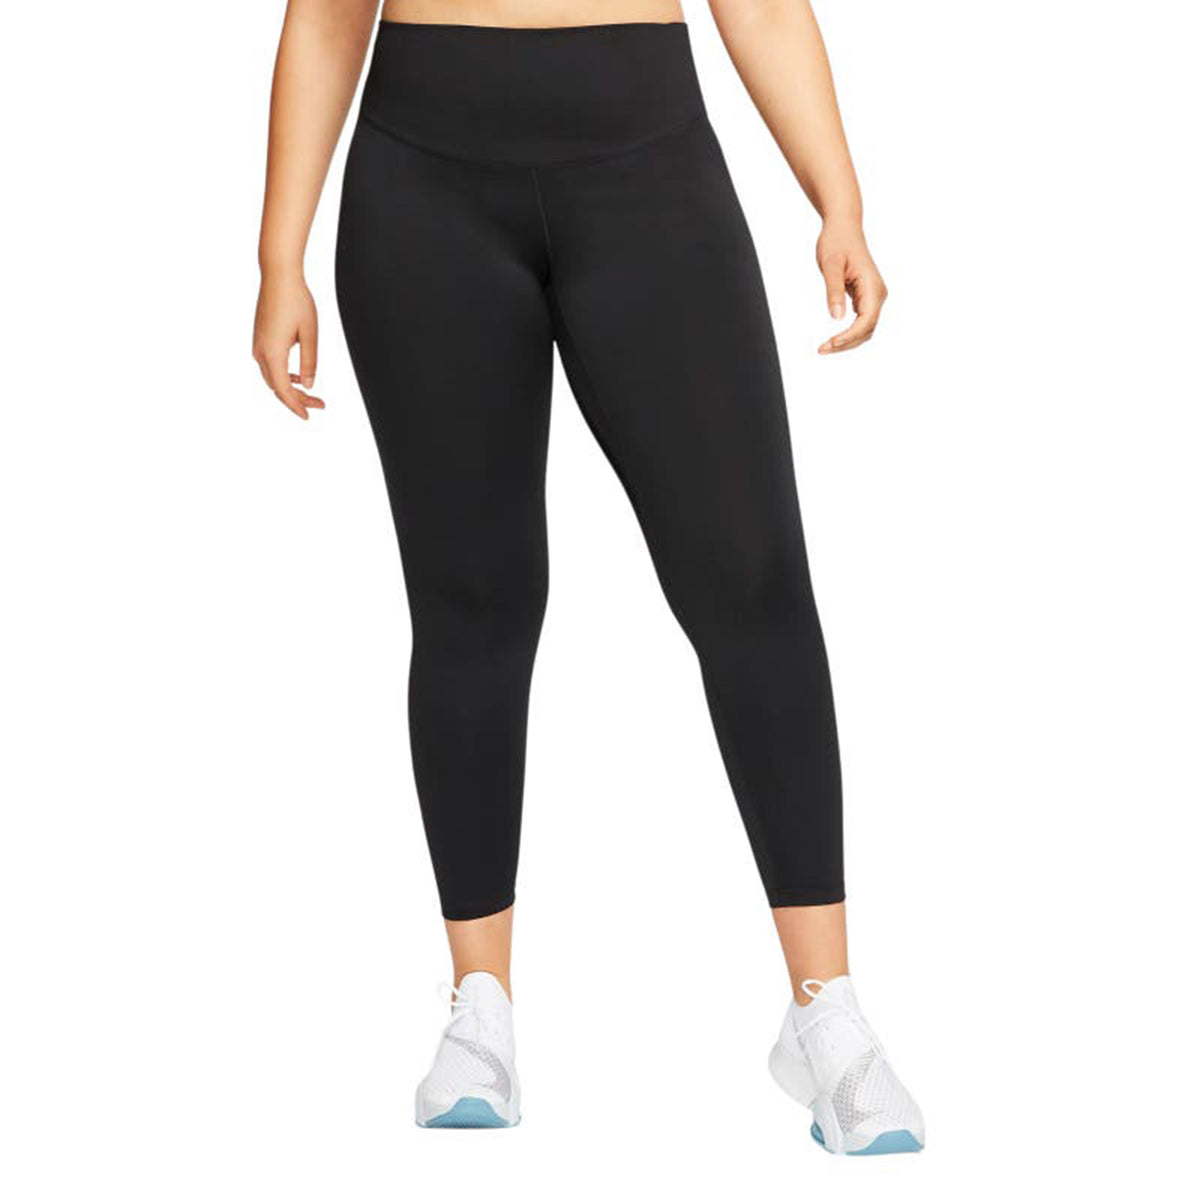 Nike Women's Mid-Rise Tights Plus Size Nike One Luxe CU2916 010